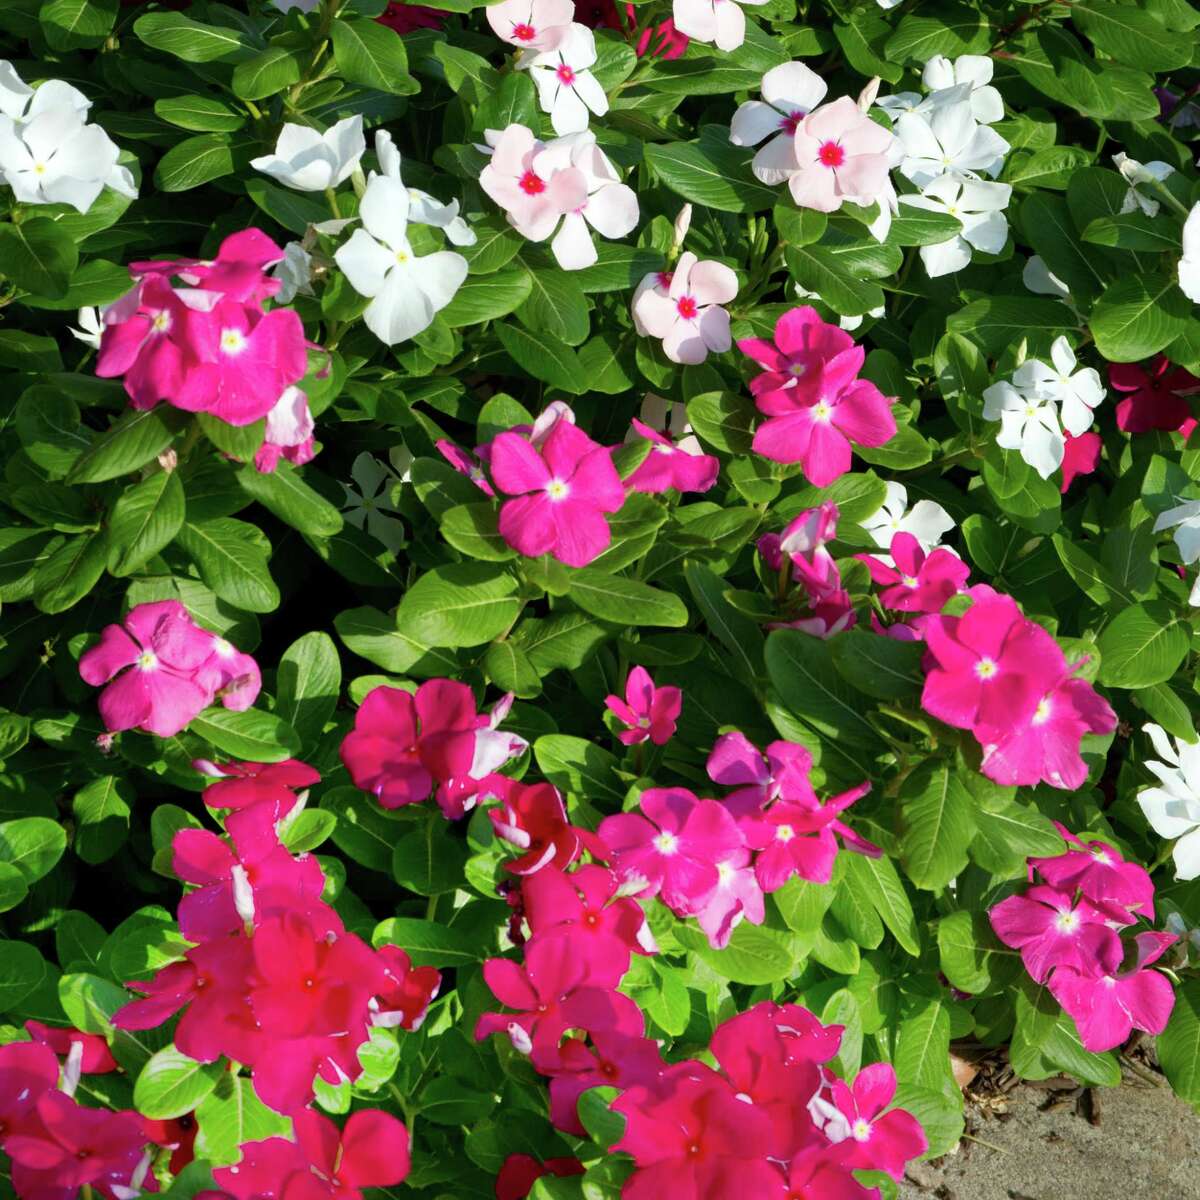 Cora periwinkles do well when planted in last half of May into early summer in well-draining soils or pots.